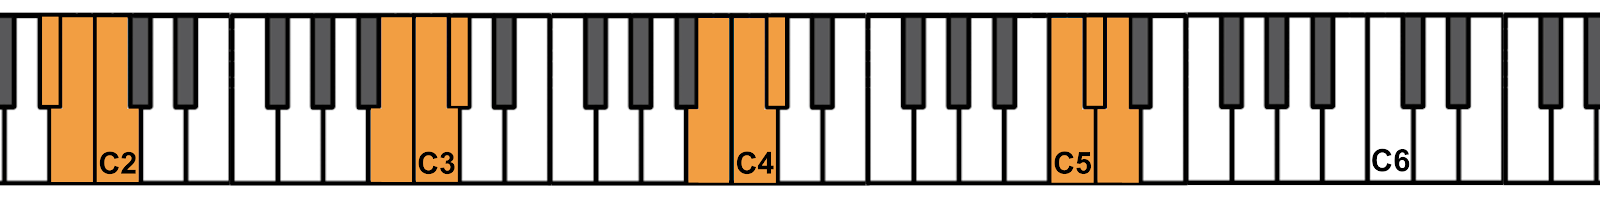 Diagram of piano keys illustrating pitch stimuli for the French horn. Keys C2, C3, C4, C5, and C6 are labelled and 4 groups of keys are highlighted in orange. More description